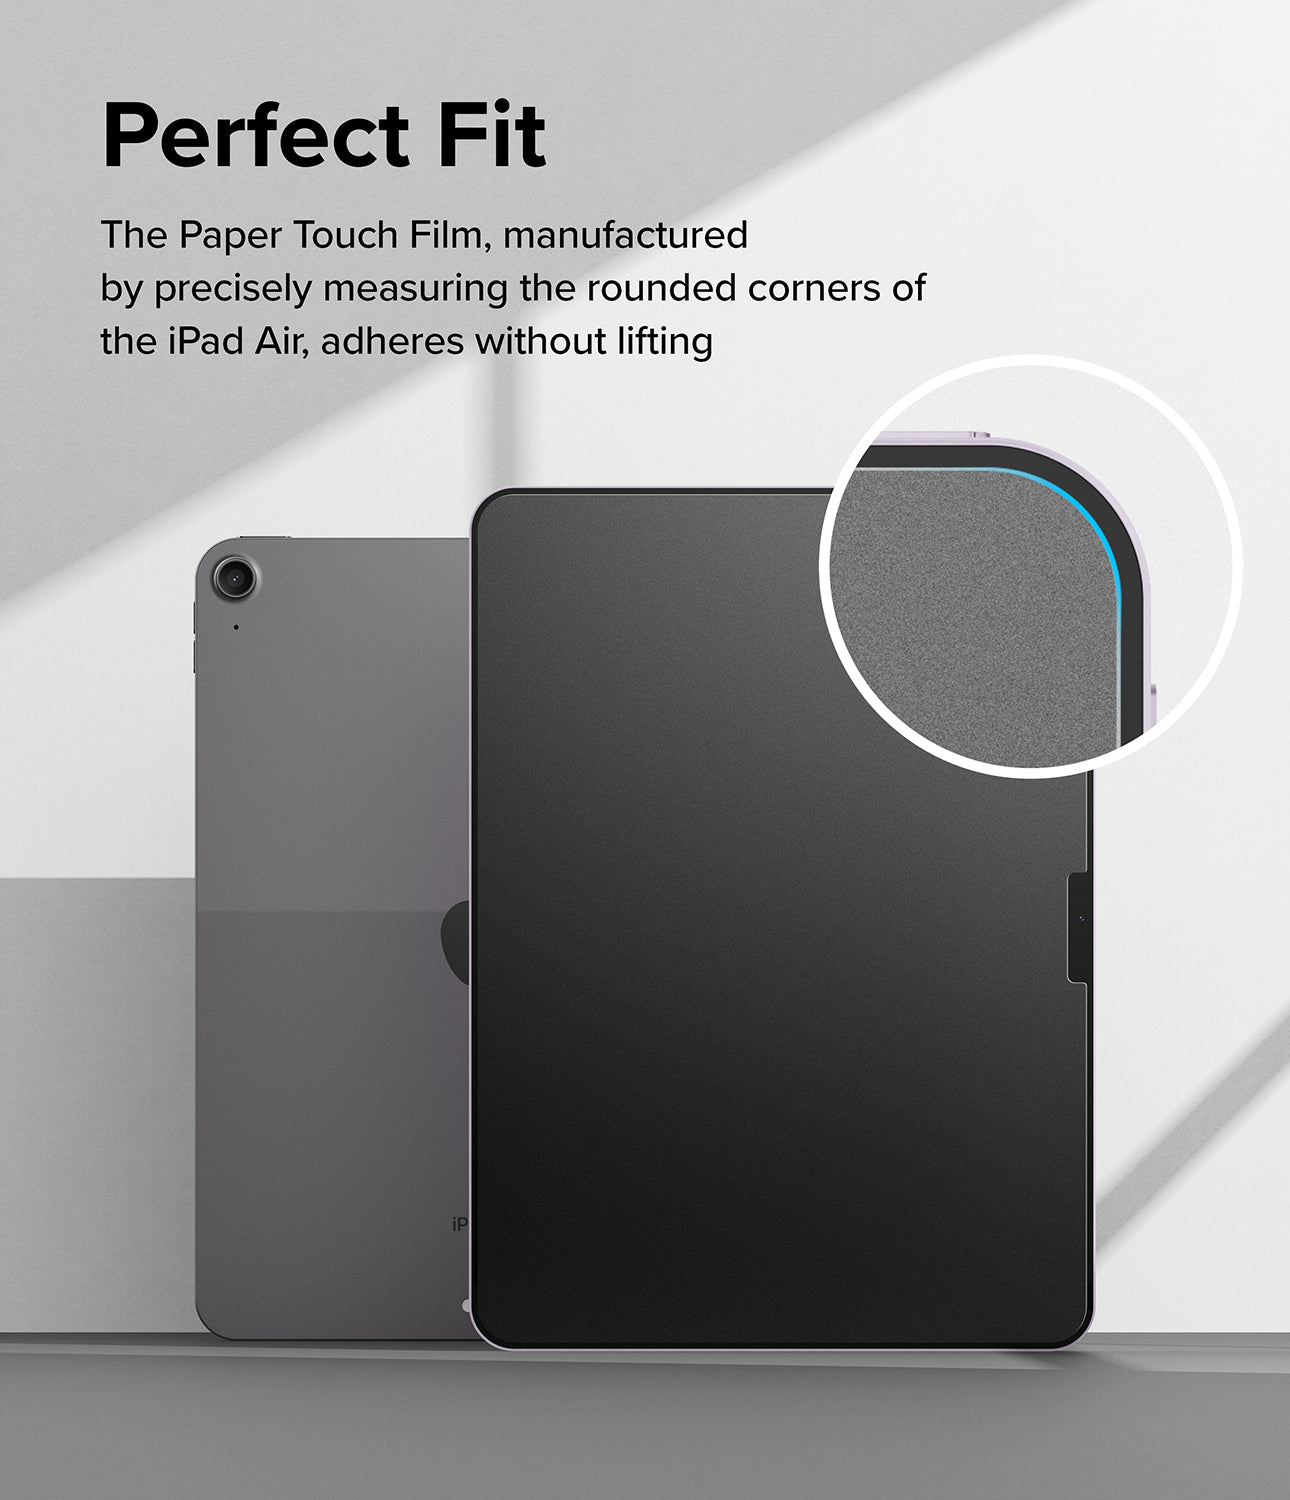 iPad Air 11" (M2) Screen Protector | Paper Touch Film - Hard - Perfect Fit. The Paper Touch Film, manufactured by precisely measuring the rounded corners of the iPad Air, adheres without lifting.